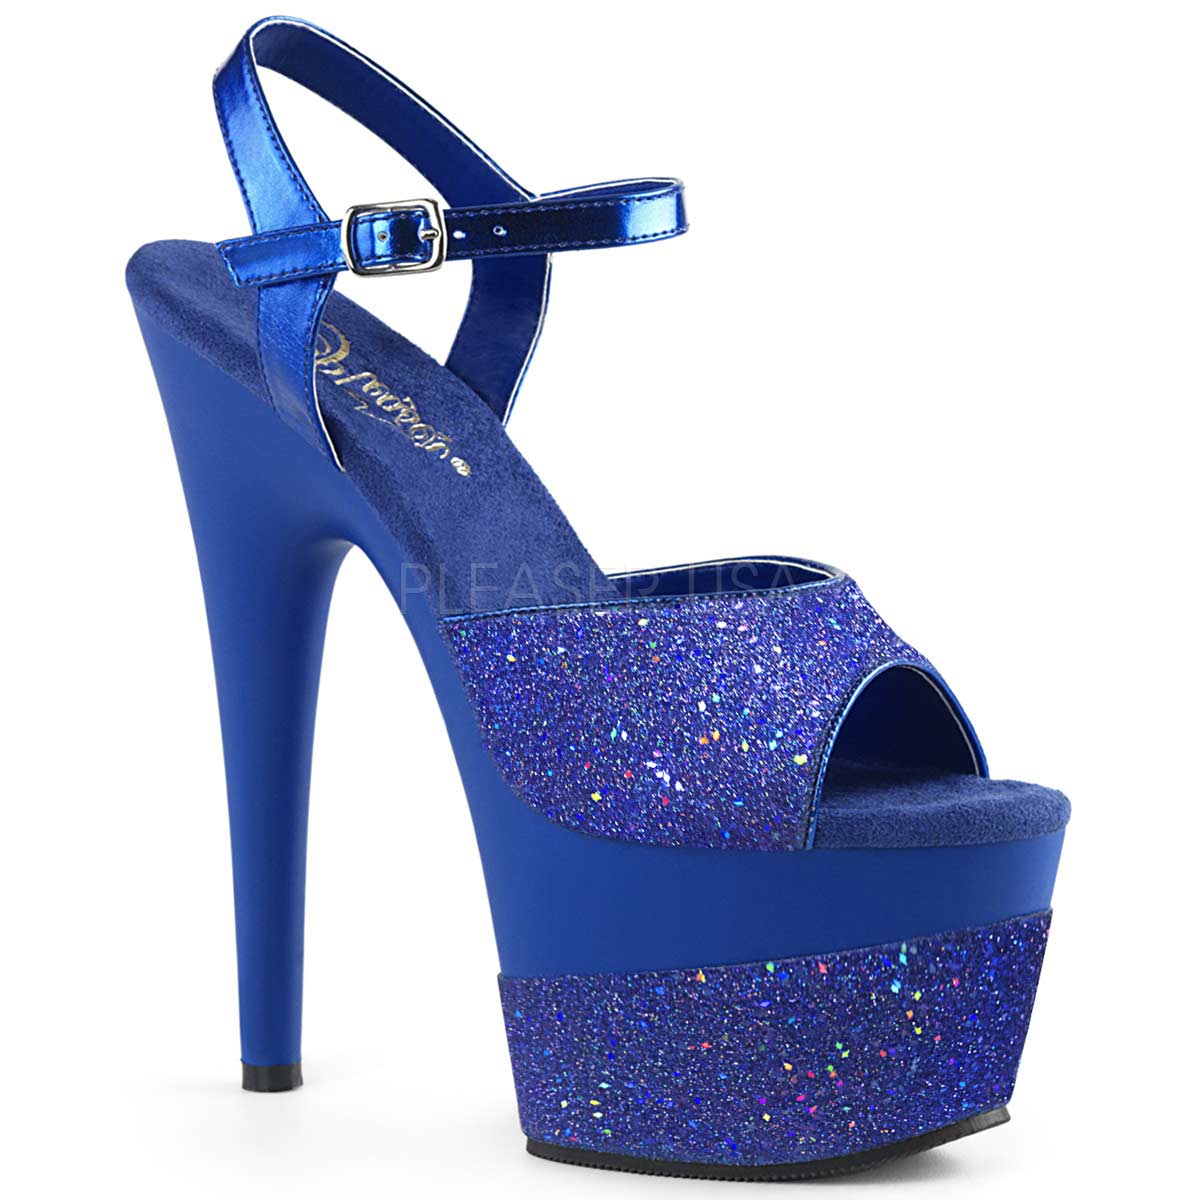 Pleaser Adore-709-2G - Royal Blue Multi Glitter in Sexy Heels ...